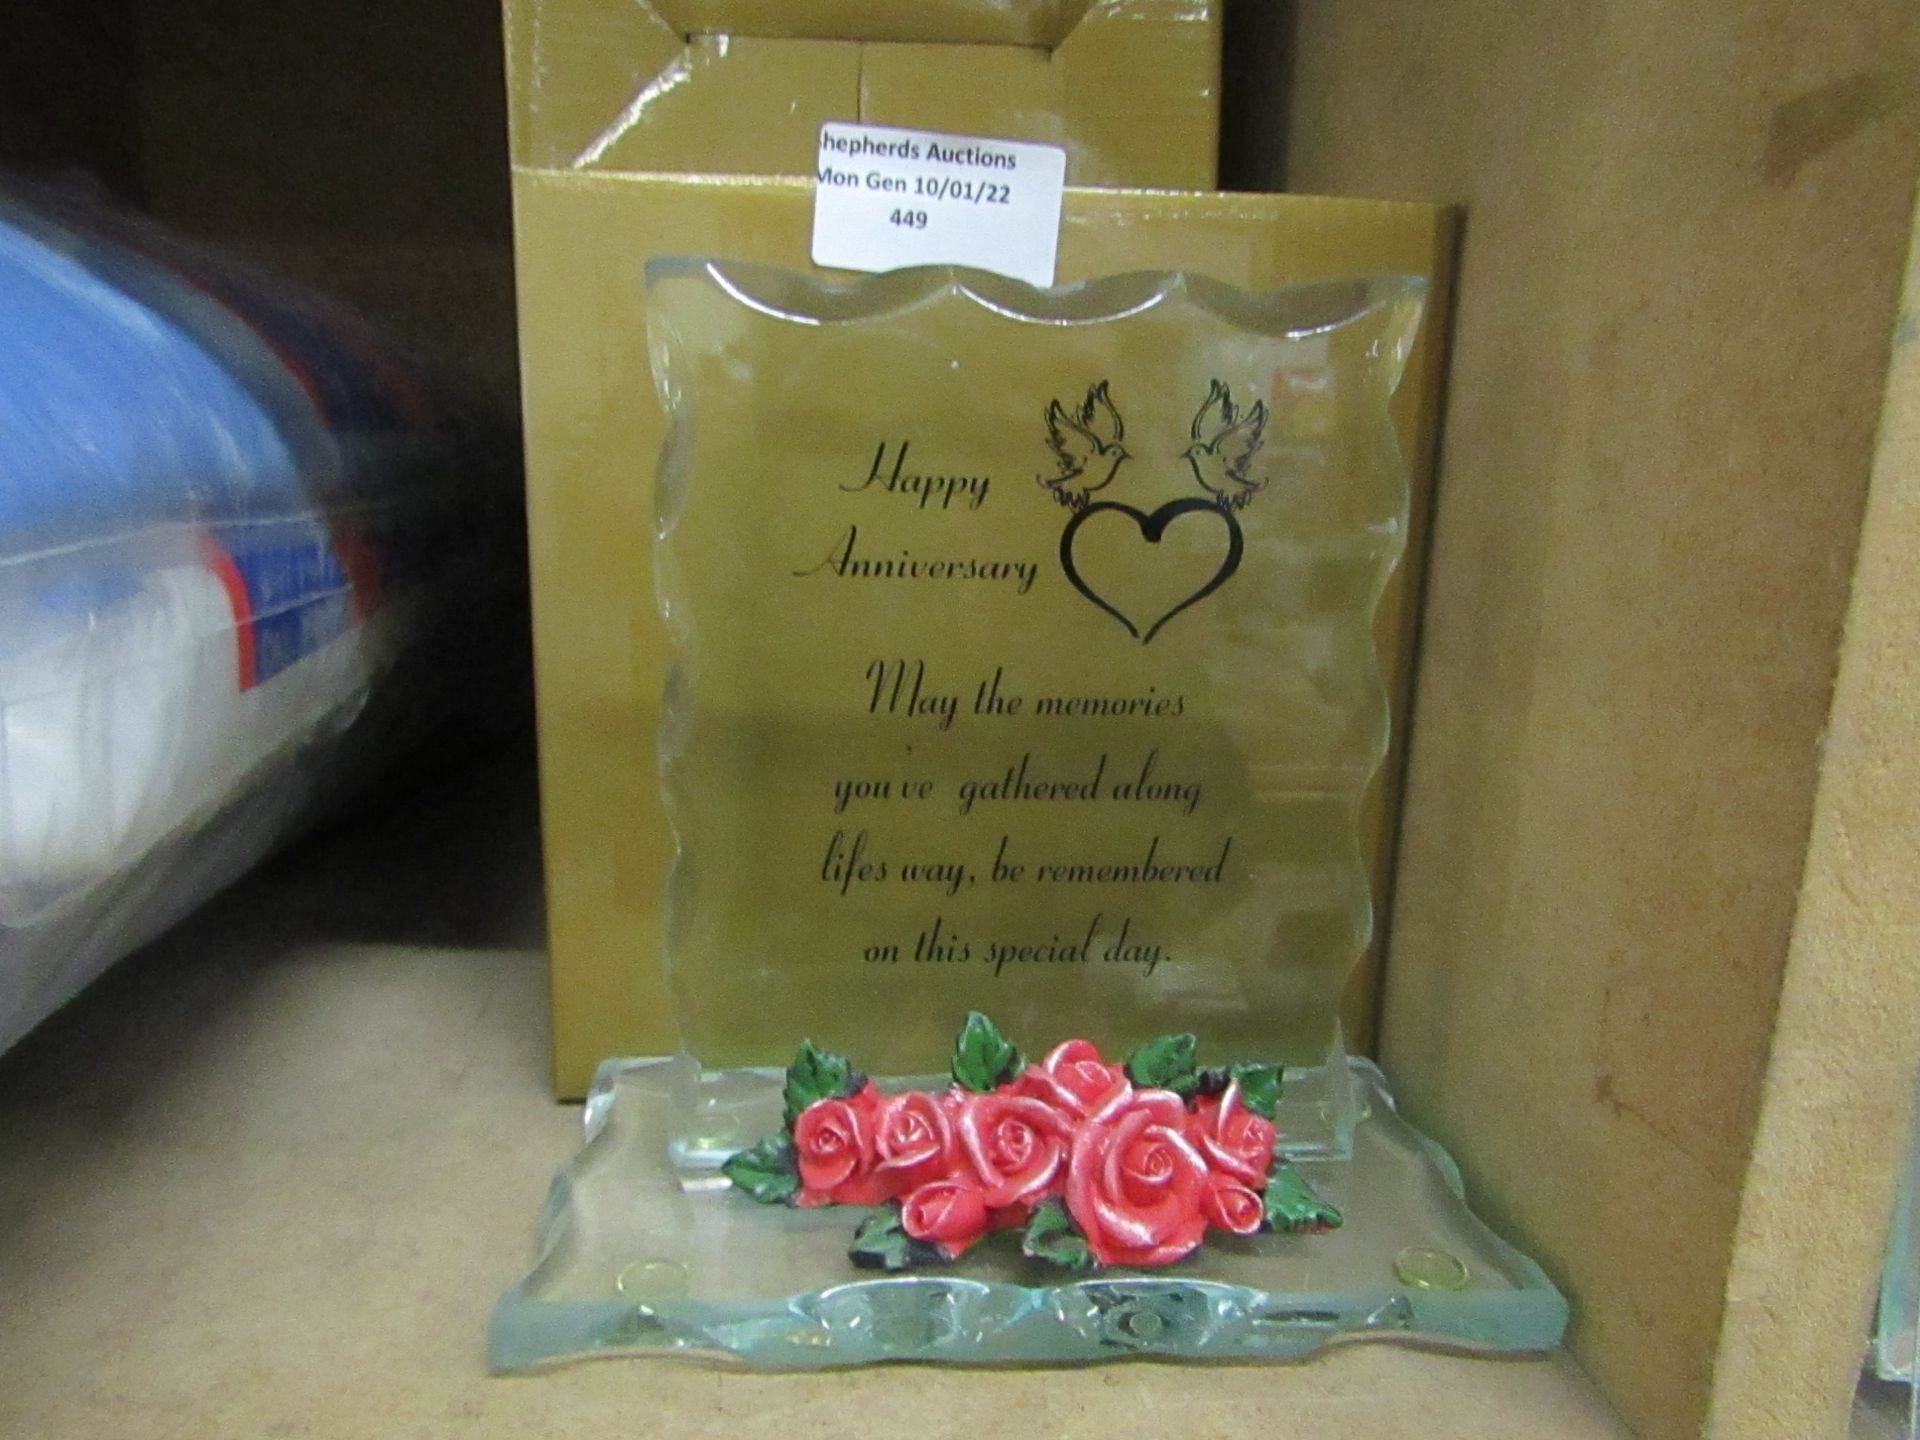 3x Mayflower Collectables - "Happy Anniversary" Glass Plaque Ornament - New & Boxed.